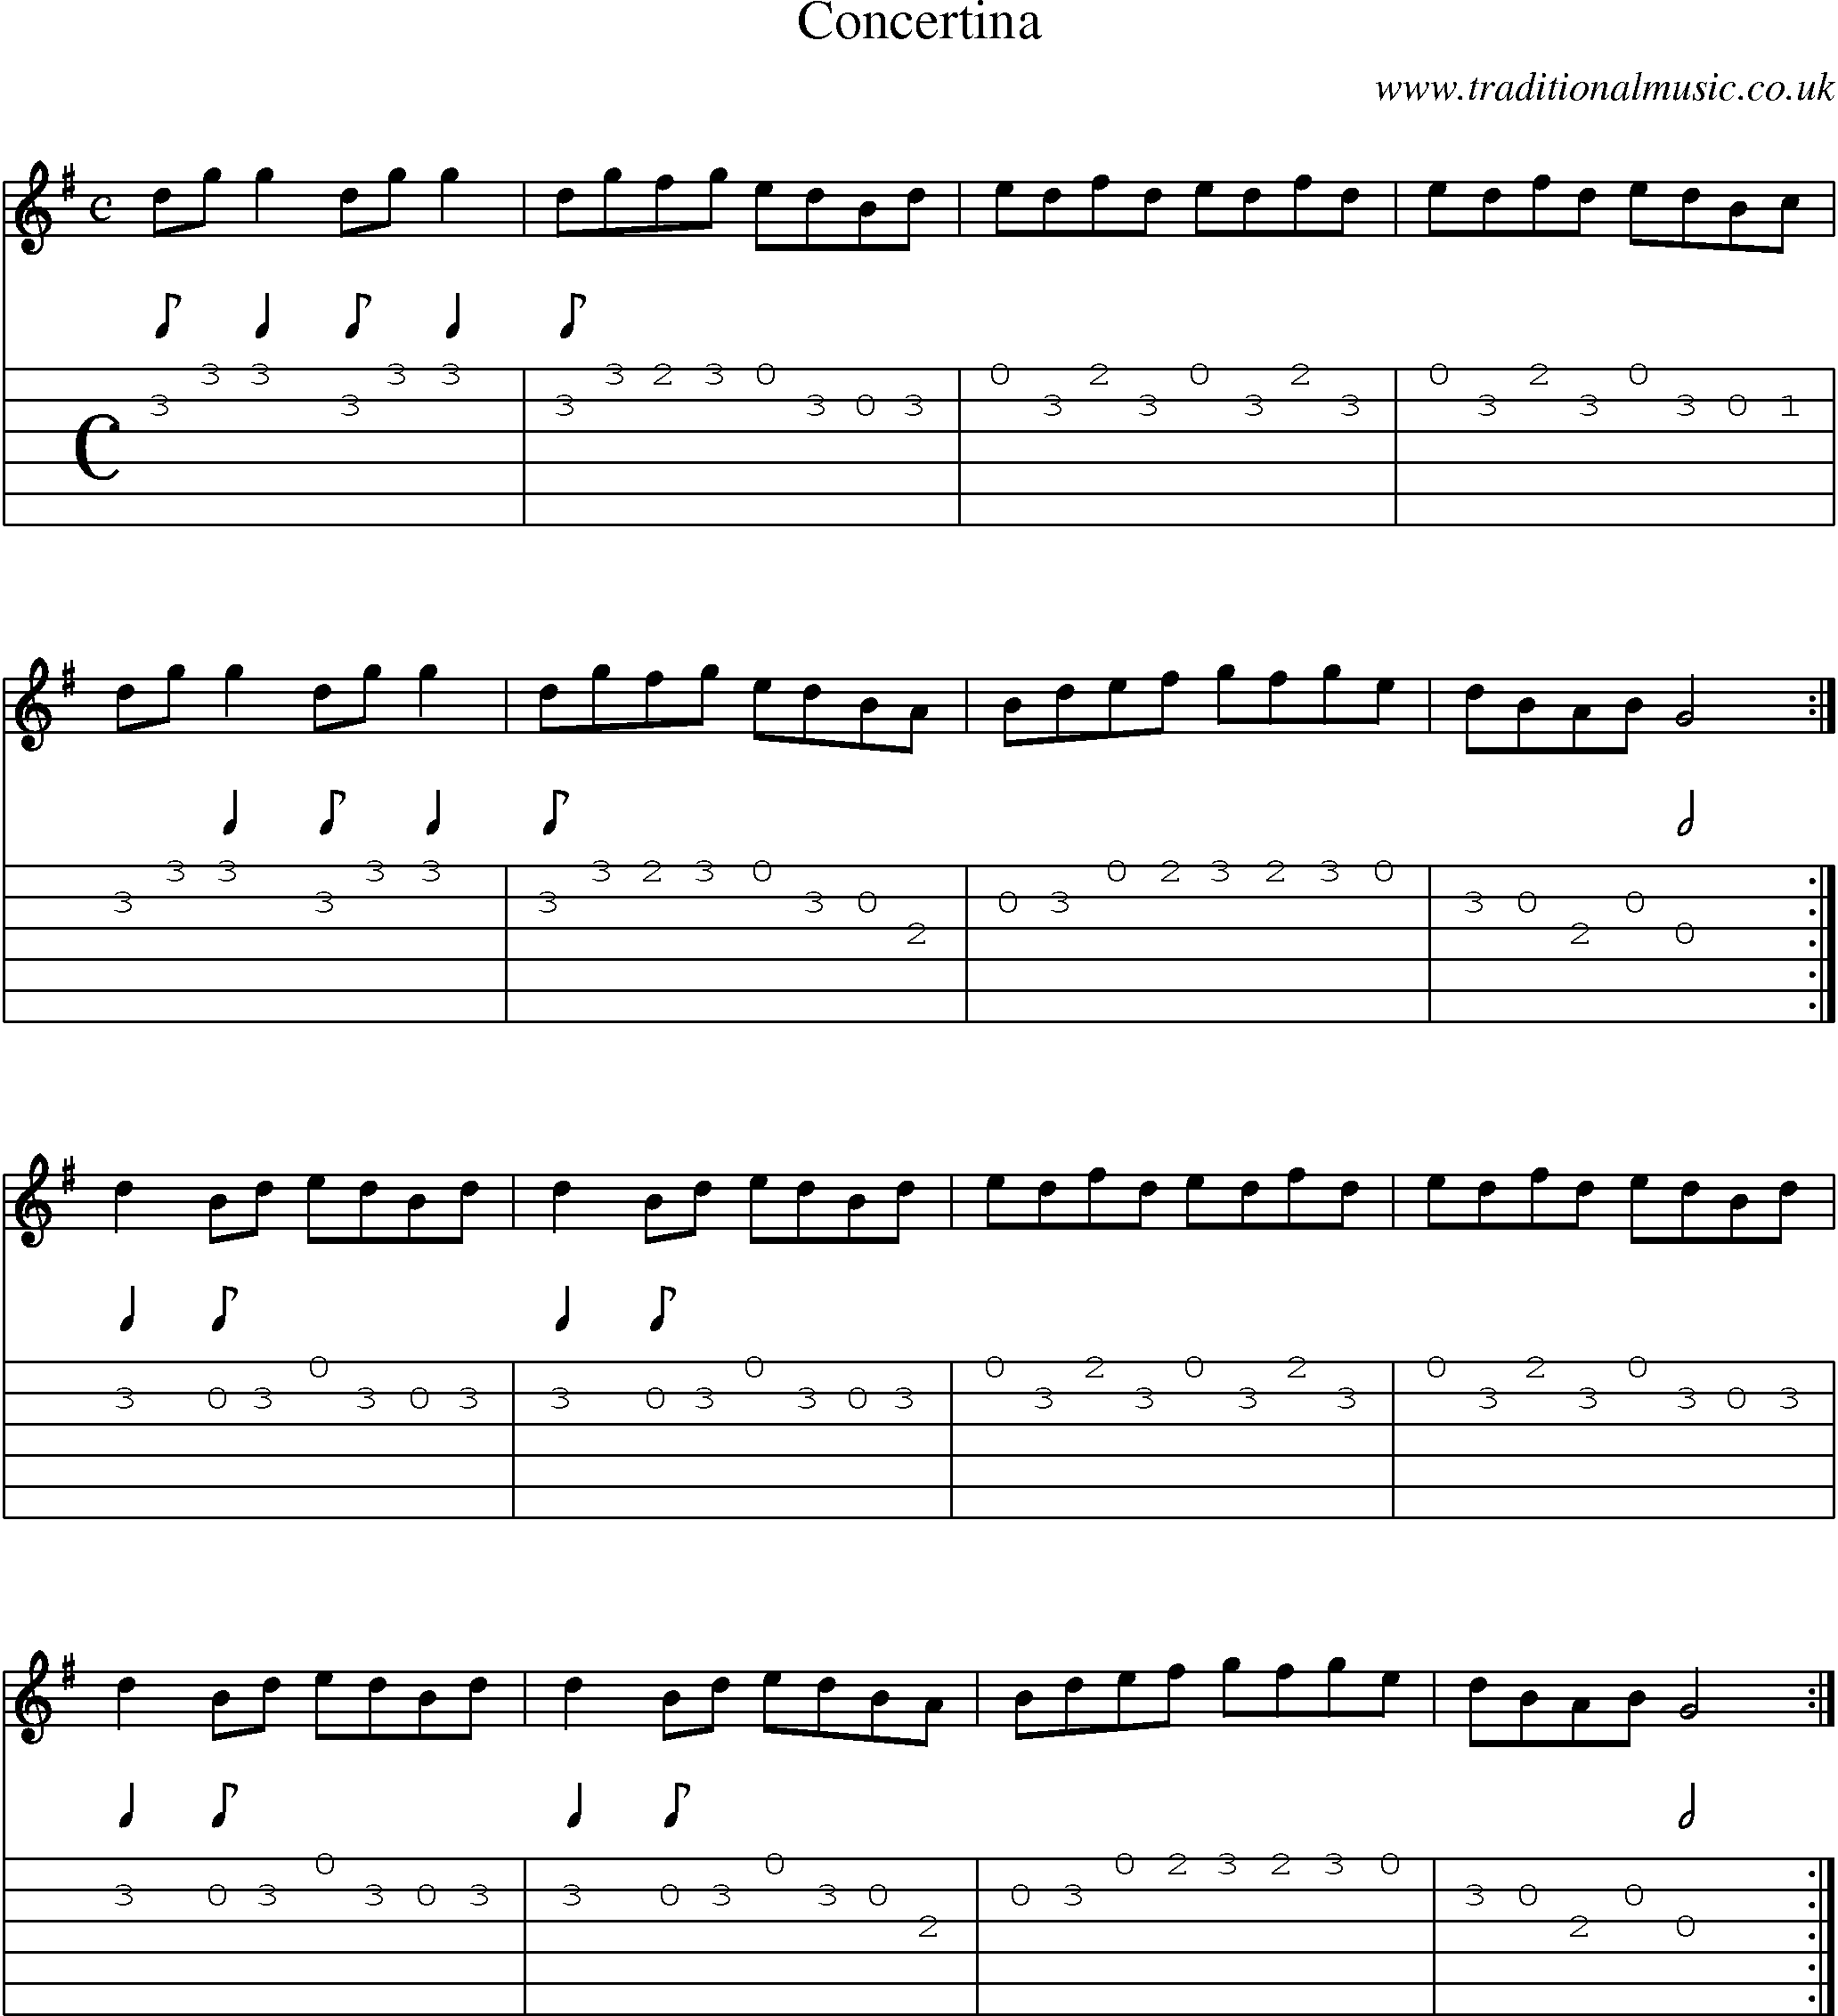 Music Score and Guitar Tabs for Concertina